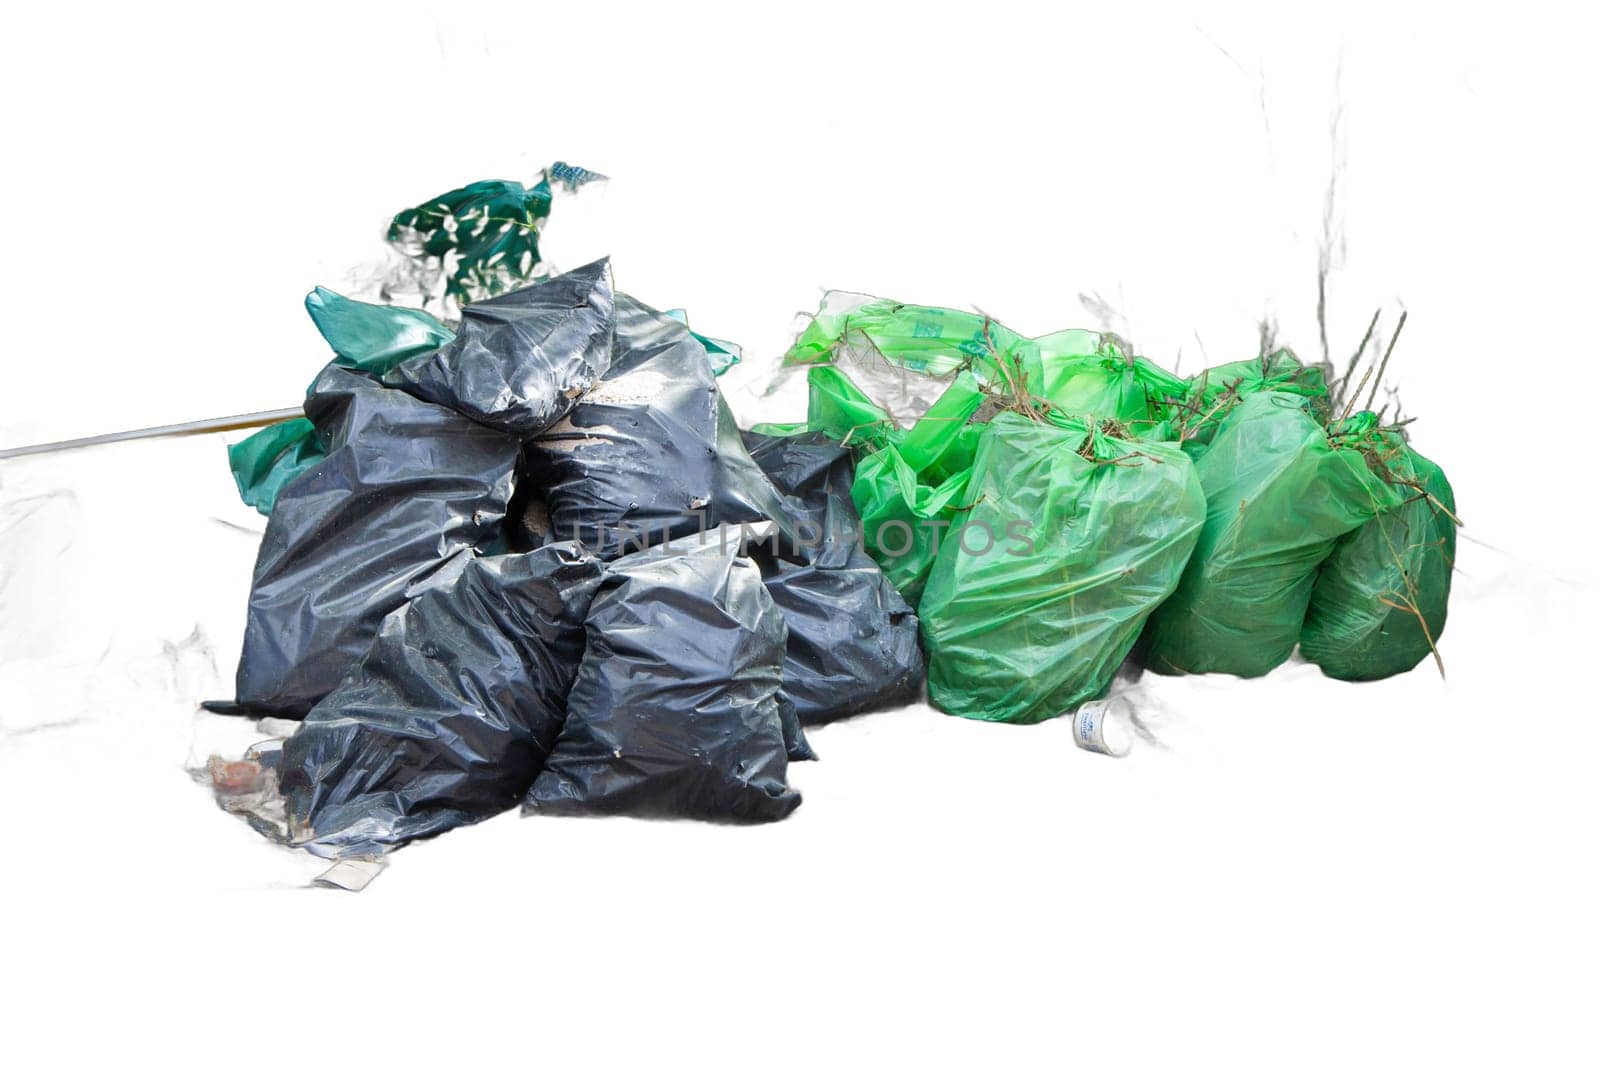 Isolated piles of trash bags in green and black colors. Perfect for waste management, sanitation, and environmental graphics